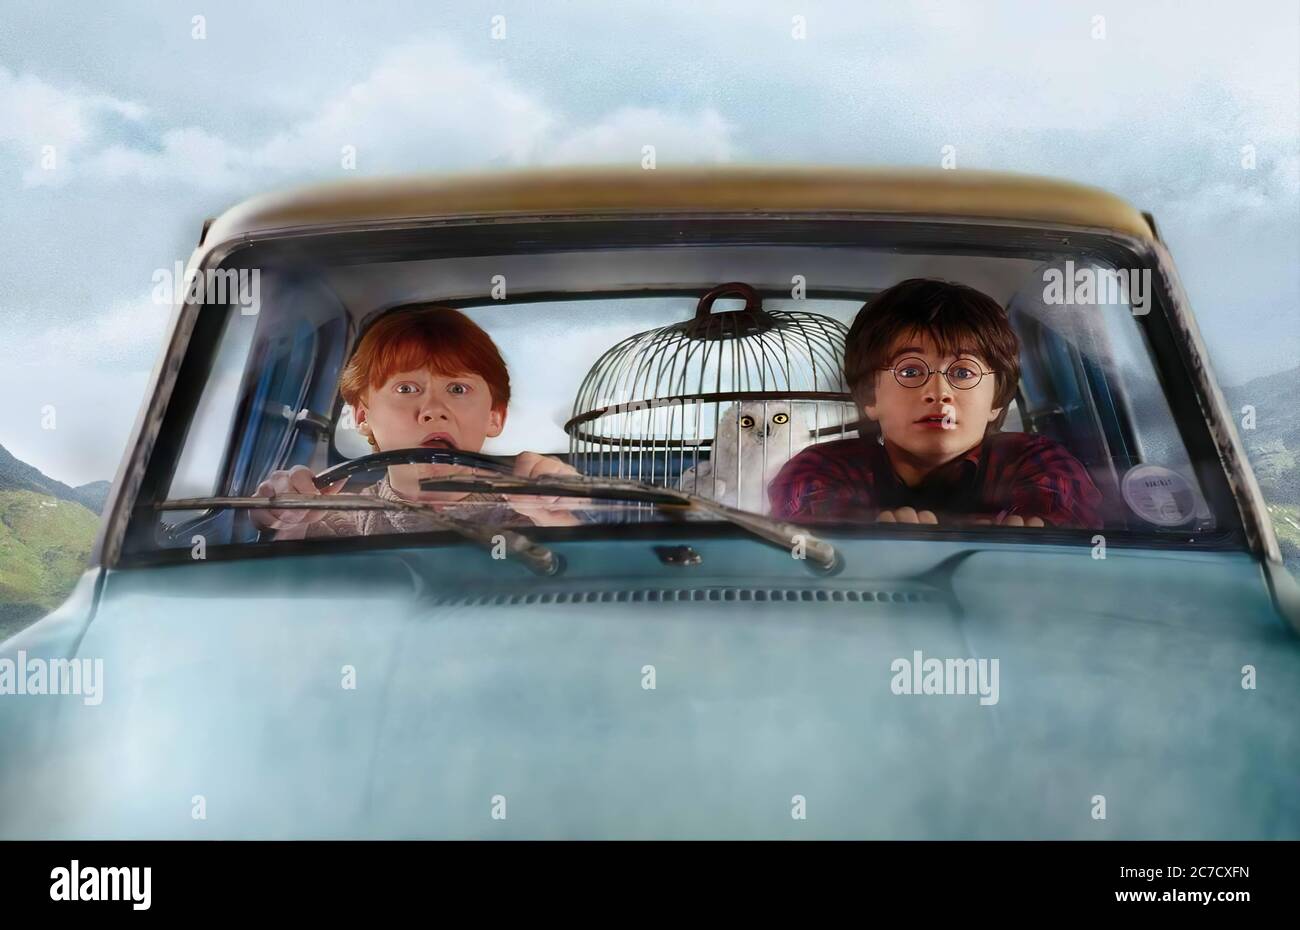 Rupert Grint and Daniel Radcliffe in Harry Potter and the Chamber of Secrets - Promotional Movie Picture Stock Photo